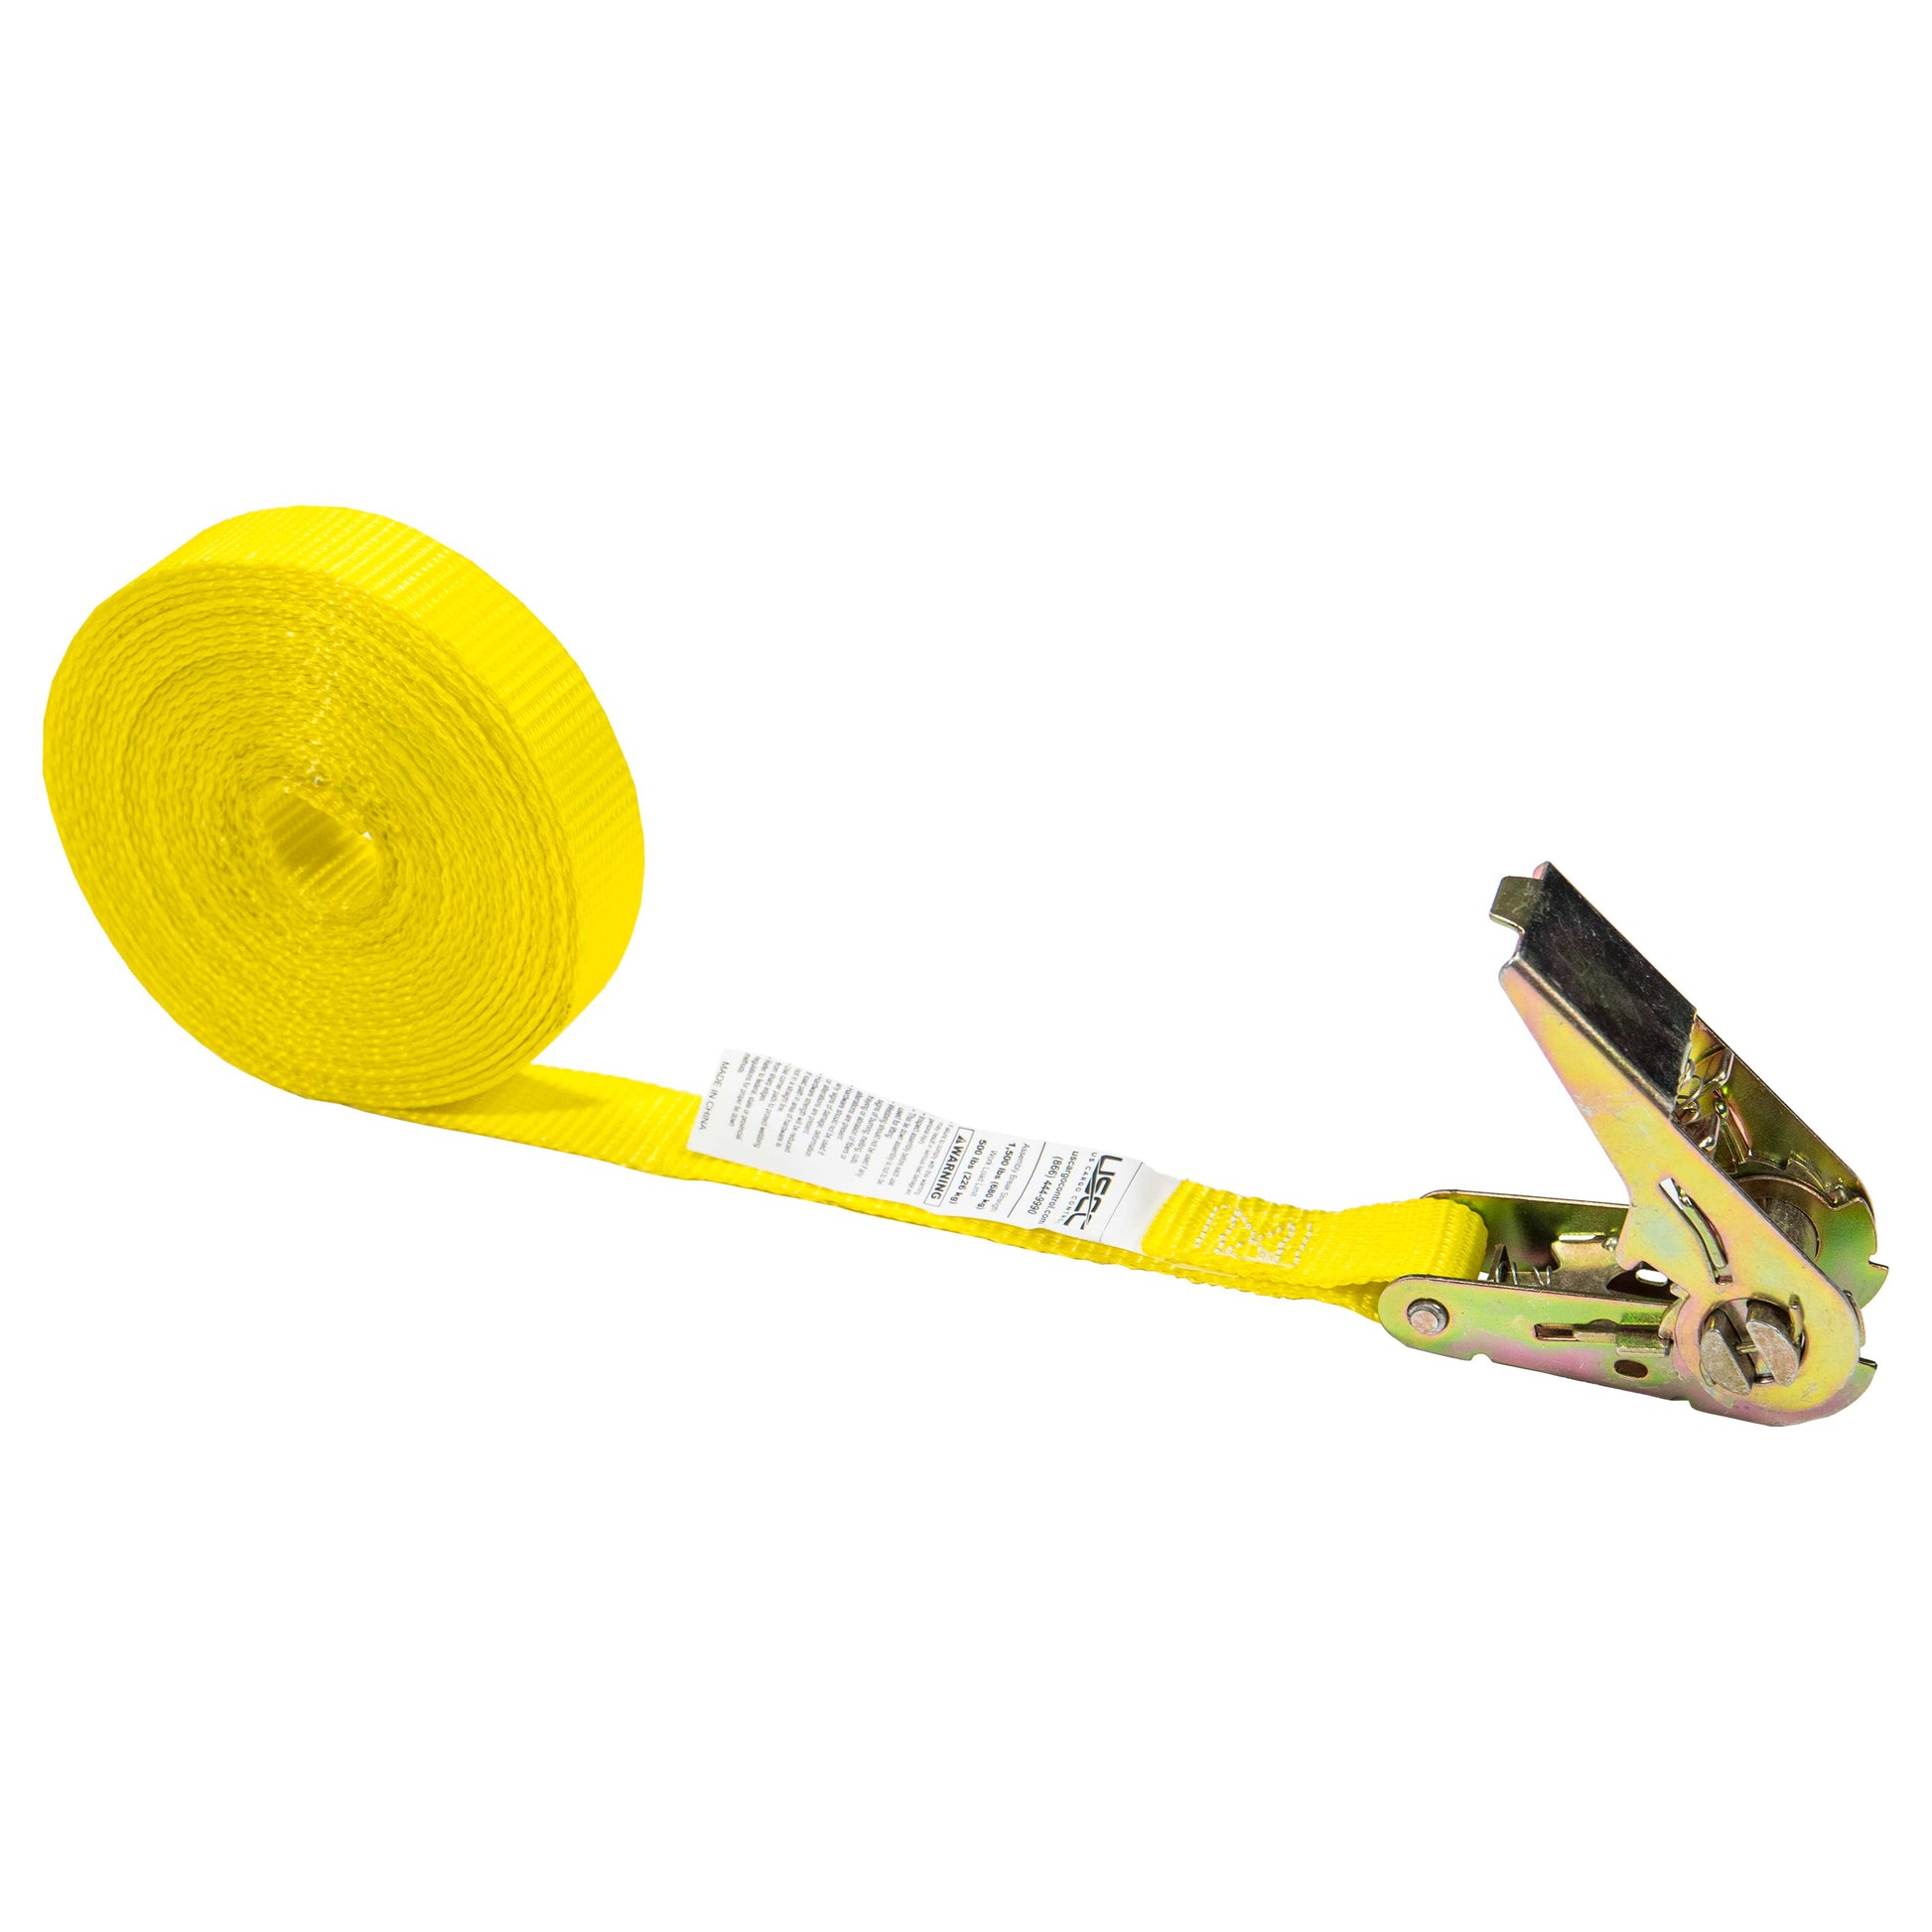 1 inch x 20 foot Yellow Endless Ratchet Strap image 1 of 9